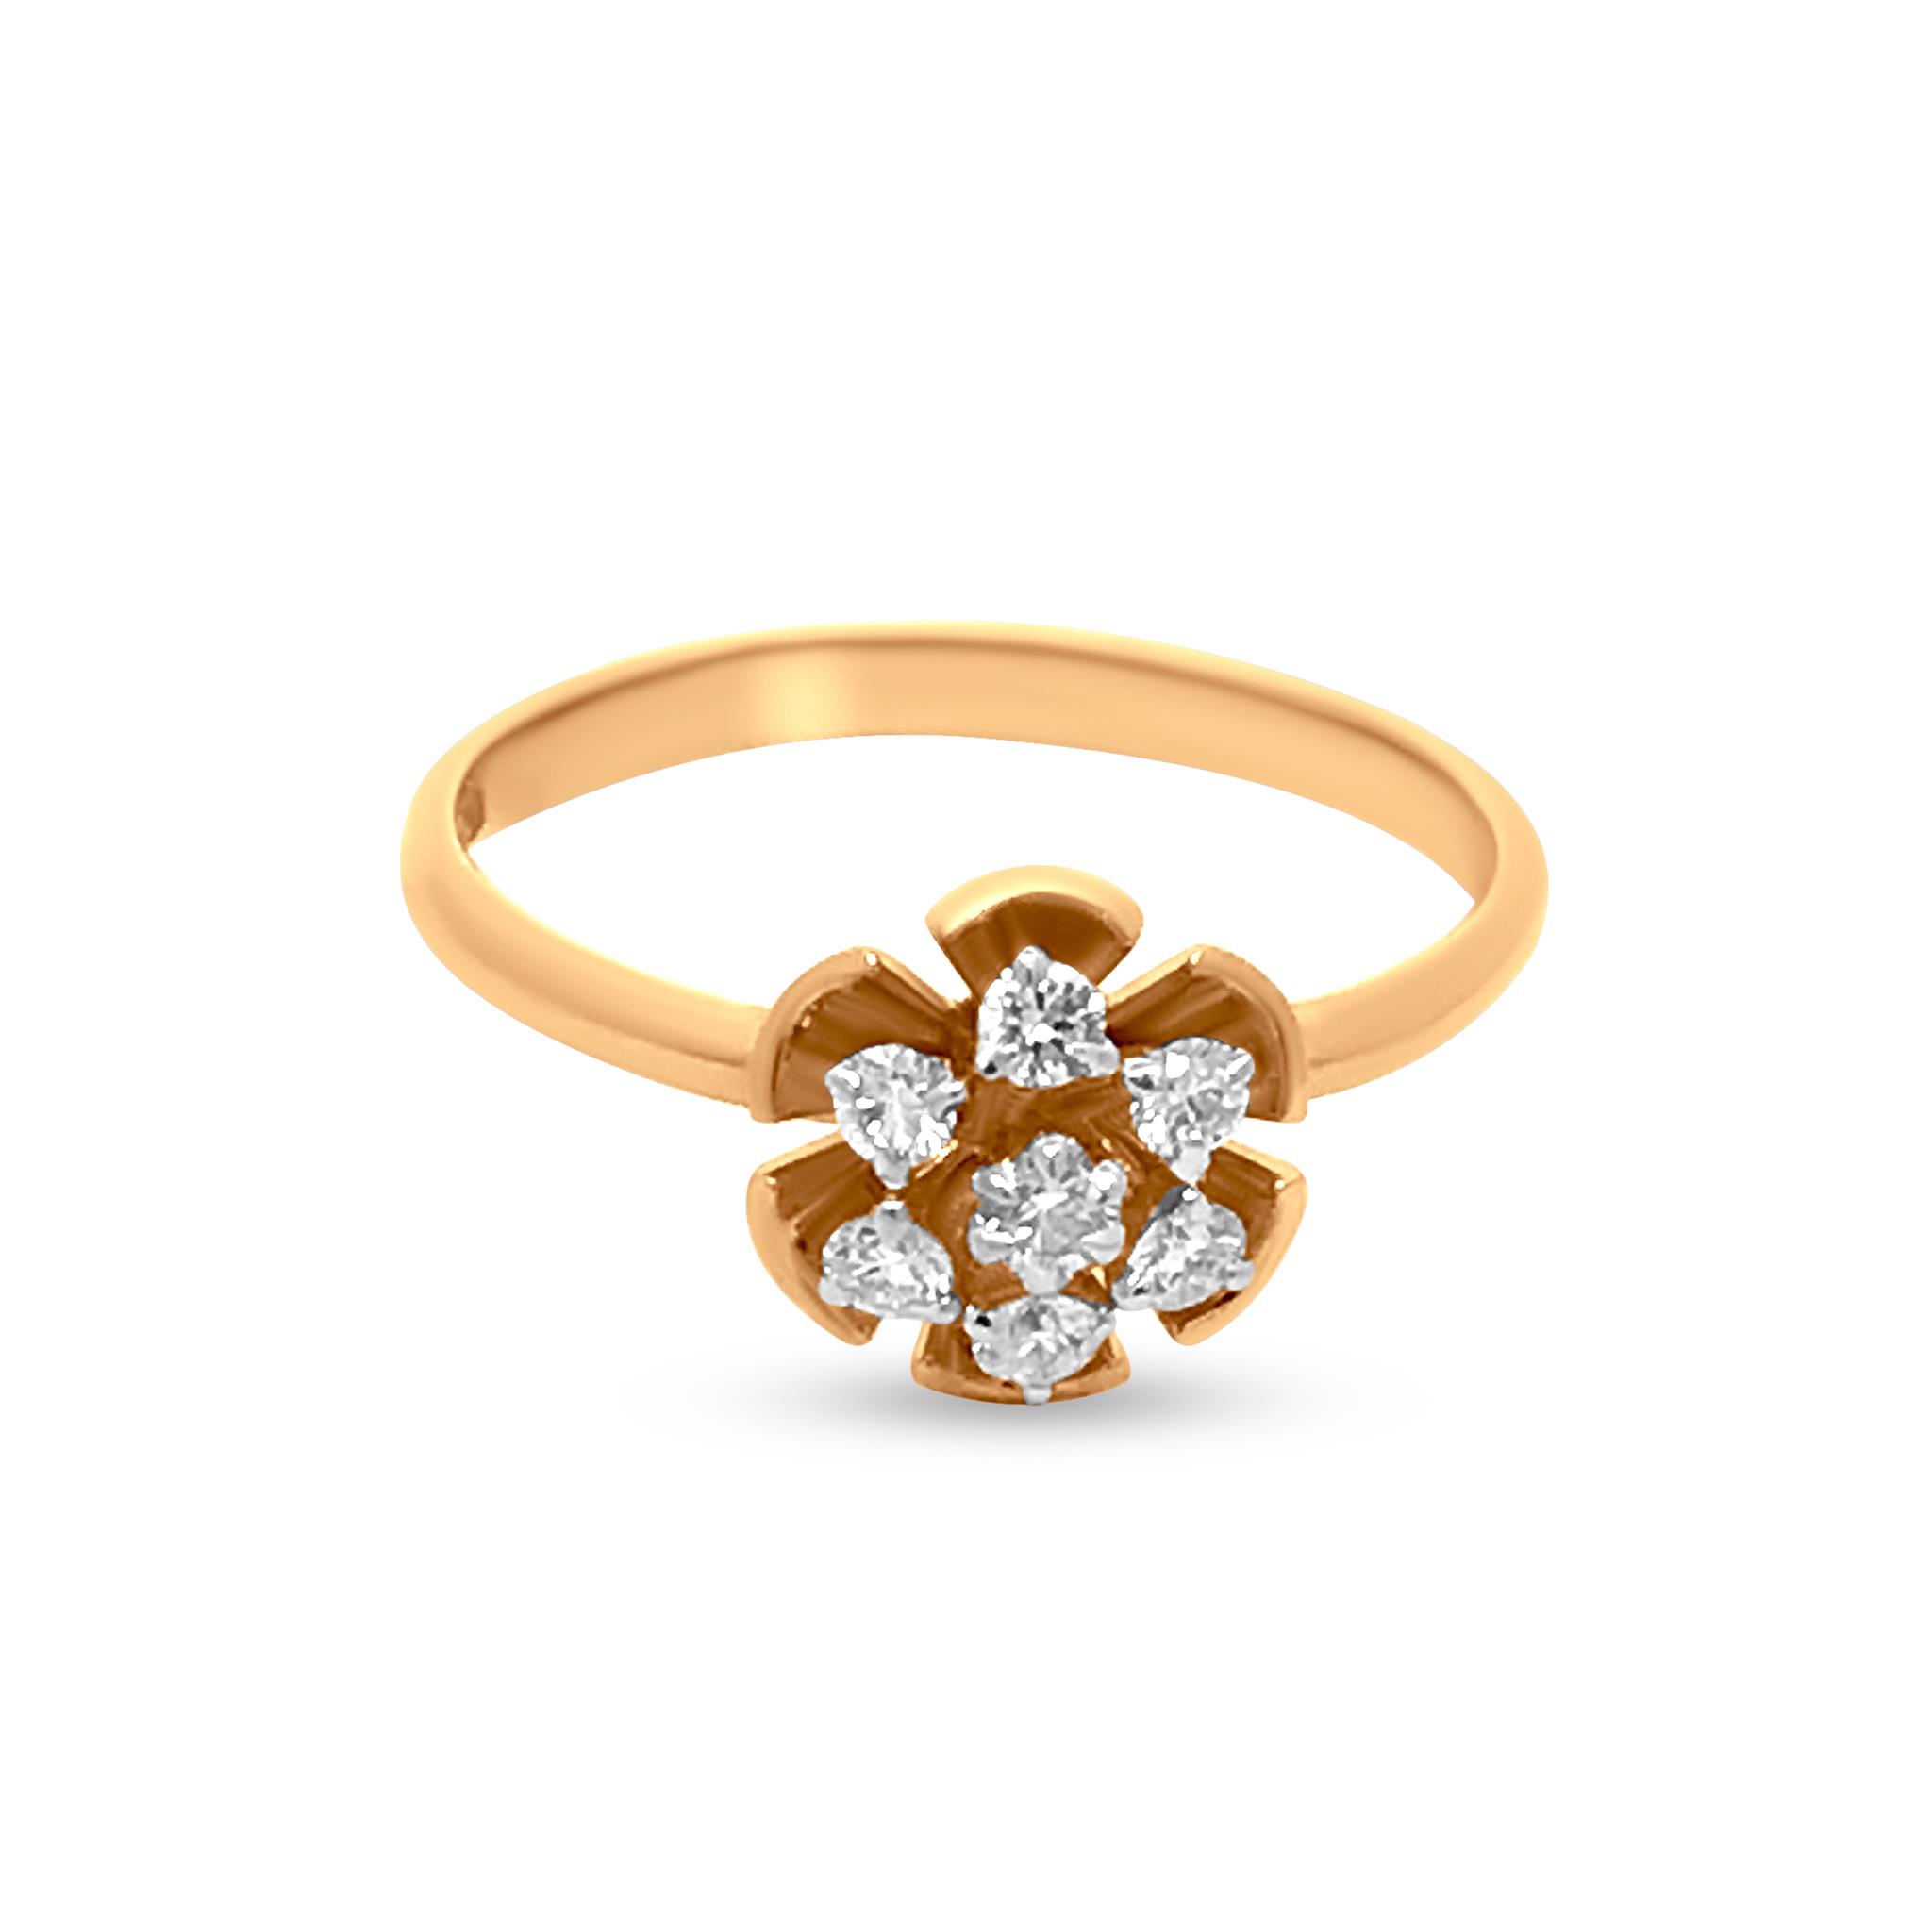 Buy Nature-Inspired 18k Yellow Gold Floral Petals Diamond Ring